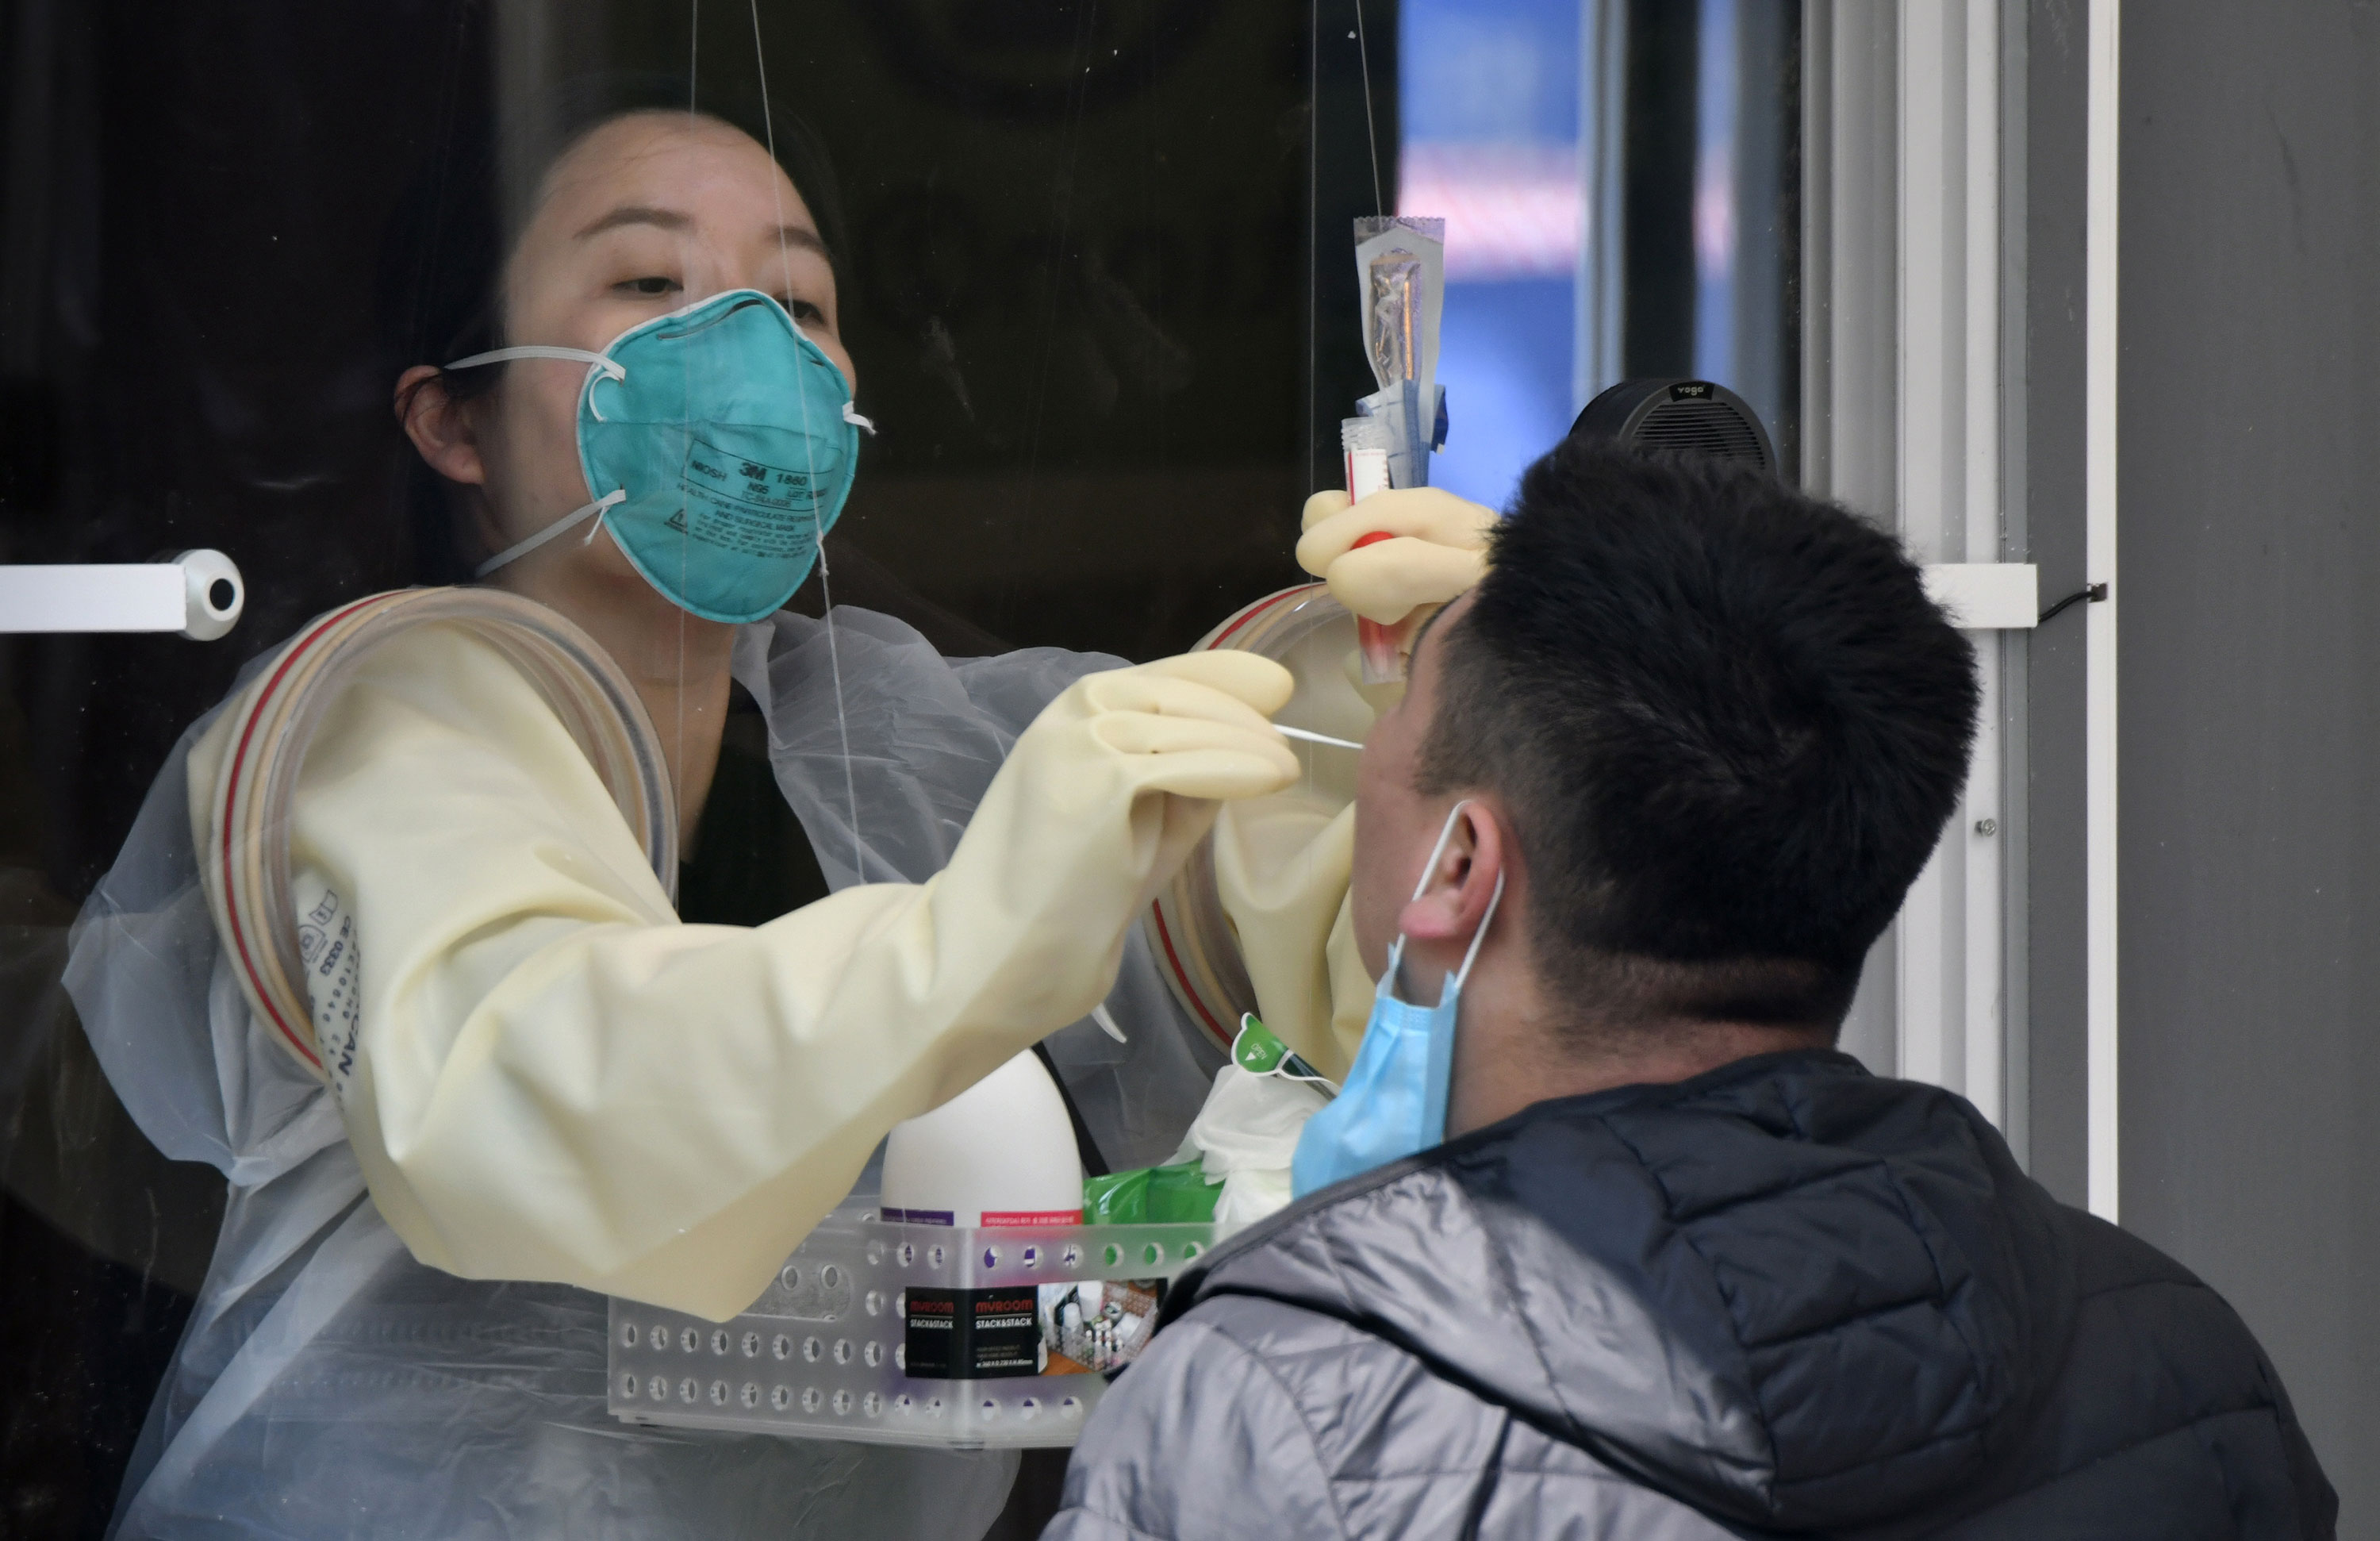 A medic administers a coronavirus test at a walk-thru testing station at Jamsil Sports Complex, in Seoul, on April 3.